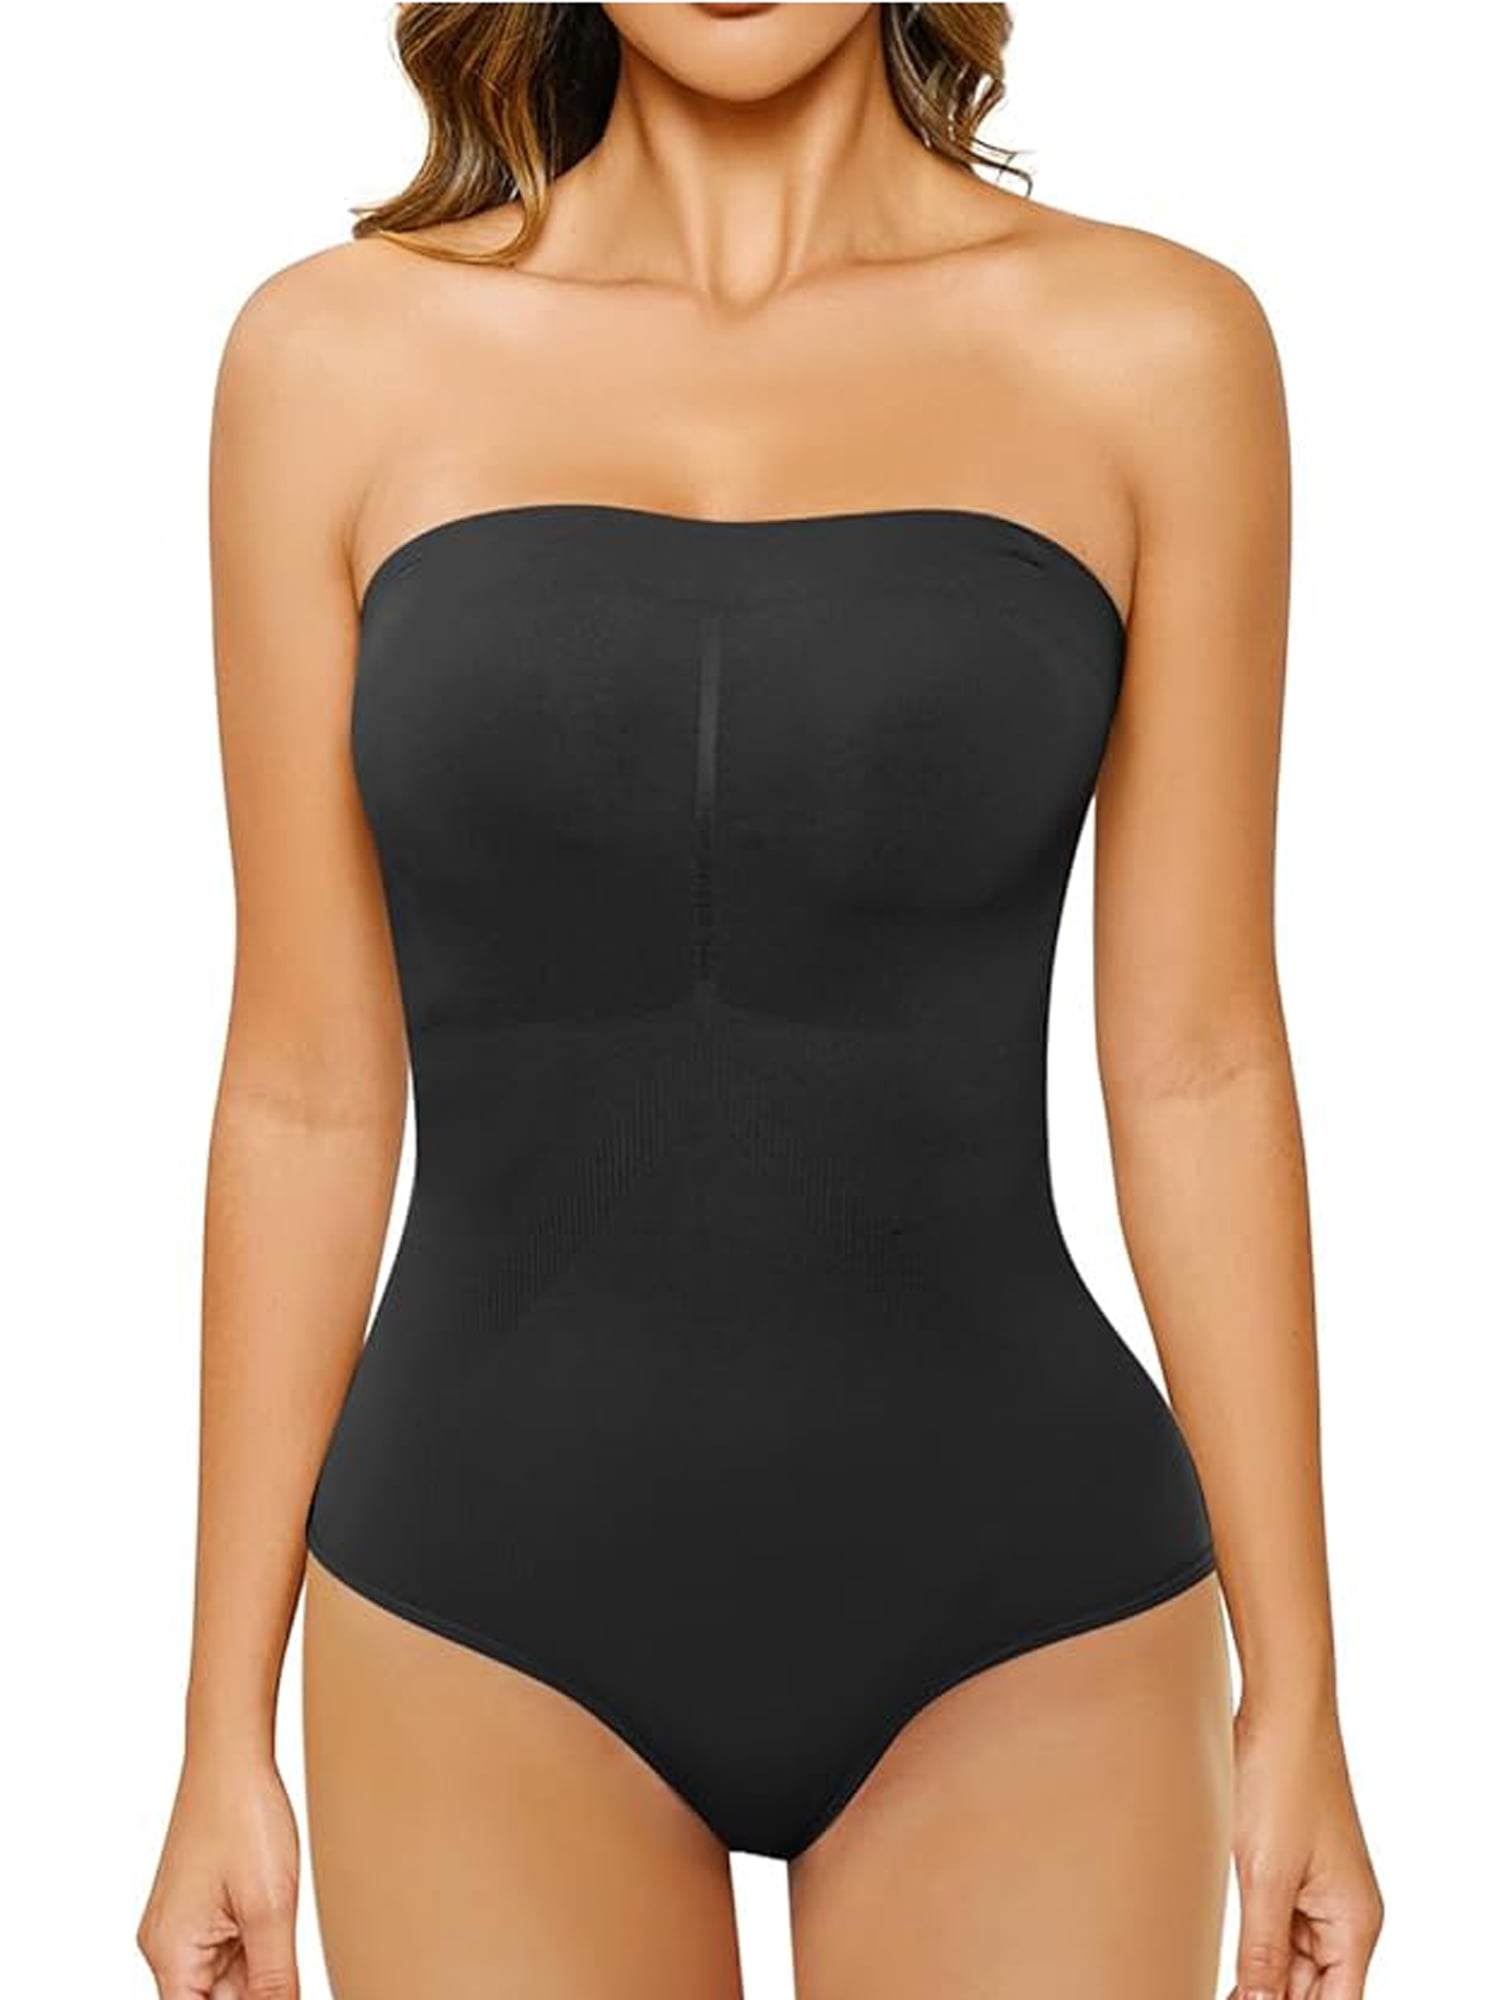  Cisisily Black Bodysuit Women Tummy Control Body Shaper  Seamless Thong Shapewear Sculpting Top Black S/M : Clothing, Shoes & Jewelry